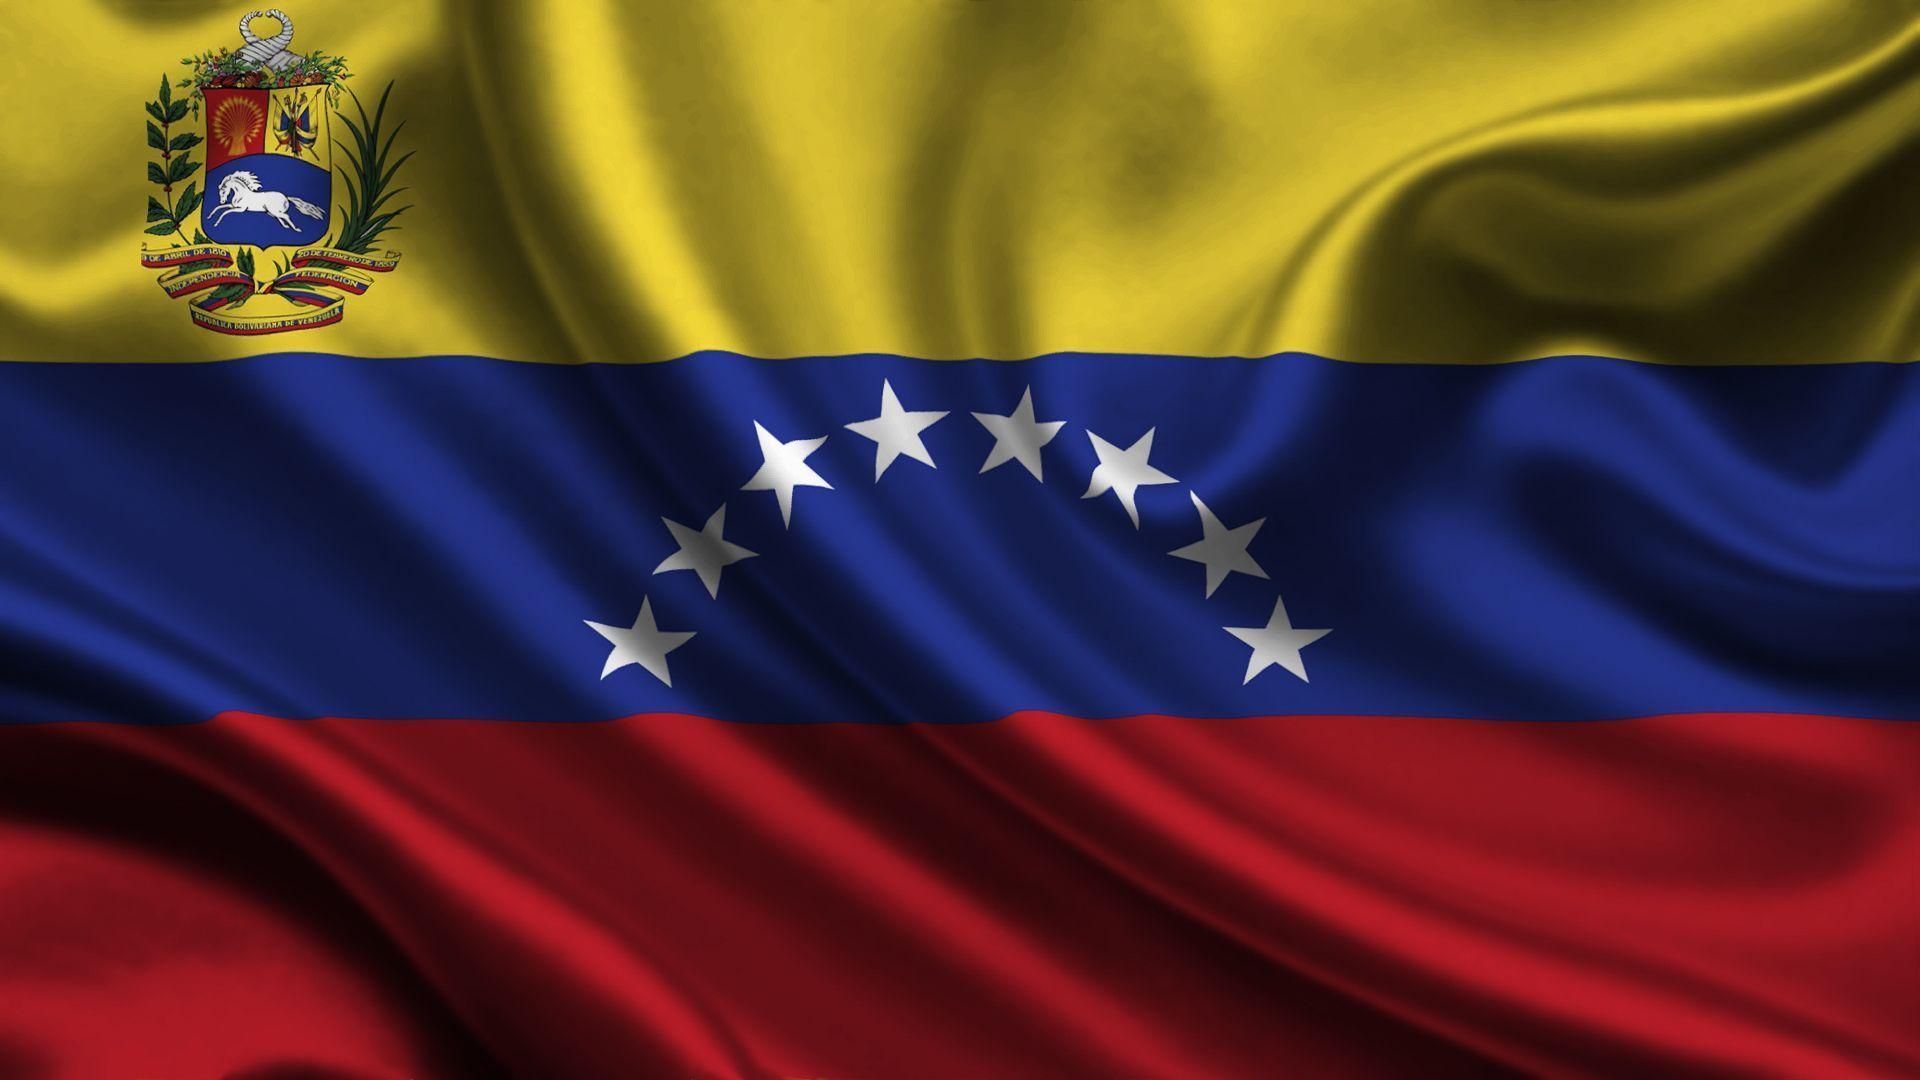 Government Inaugurated a Bank of the Venezuelan National Armed